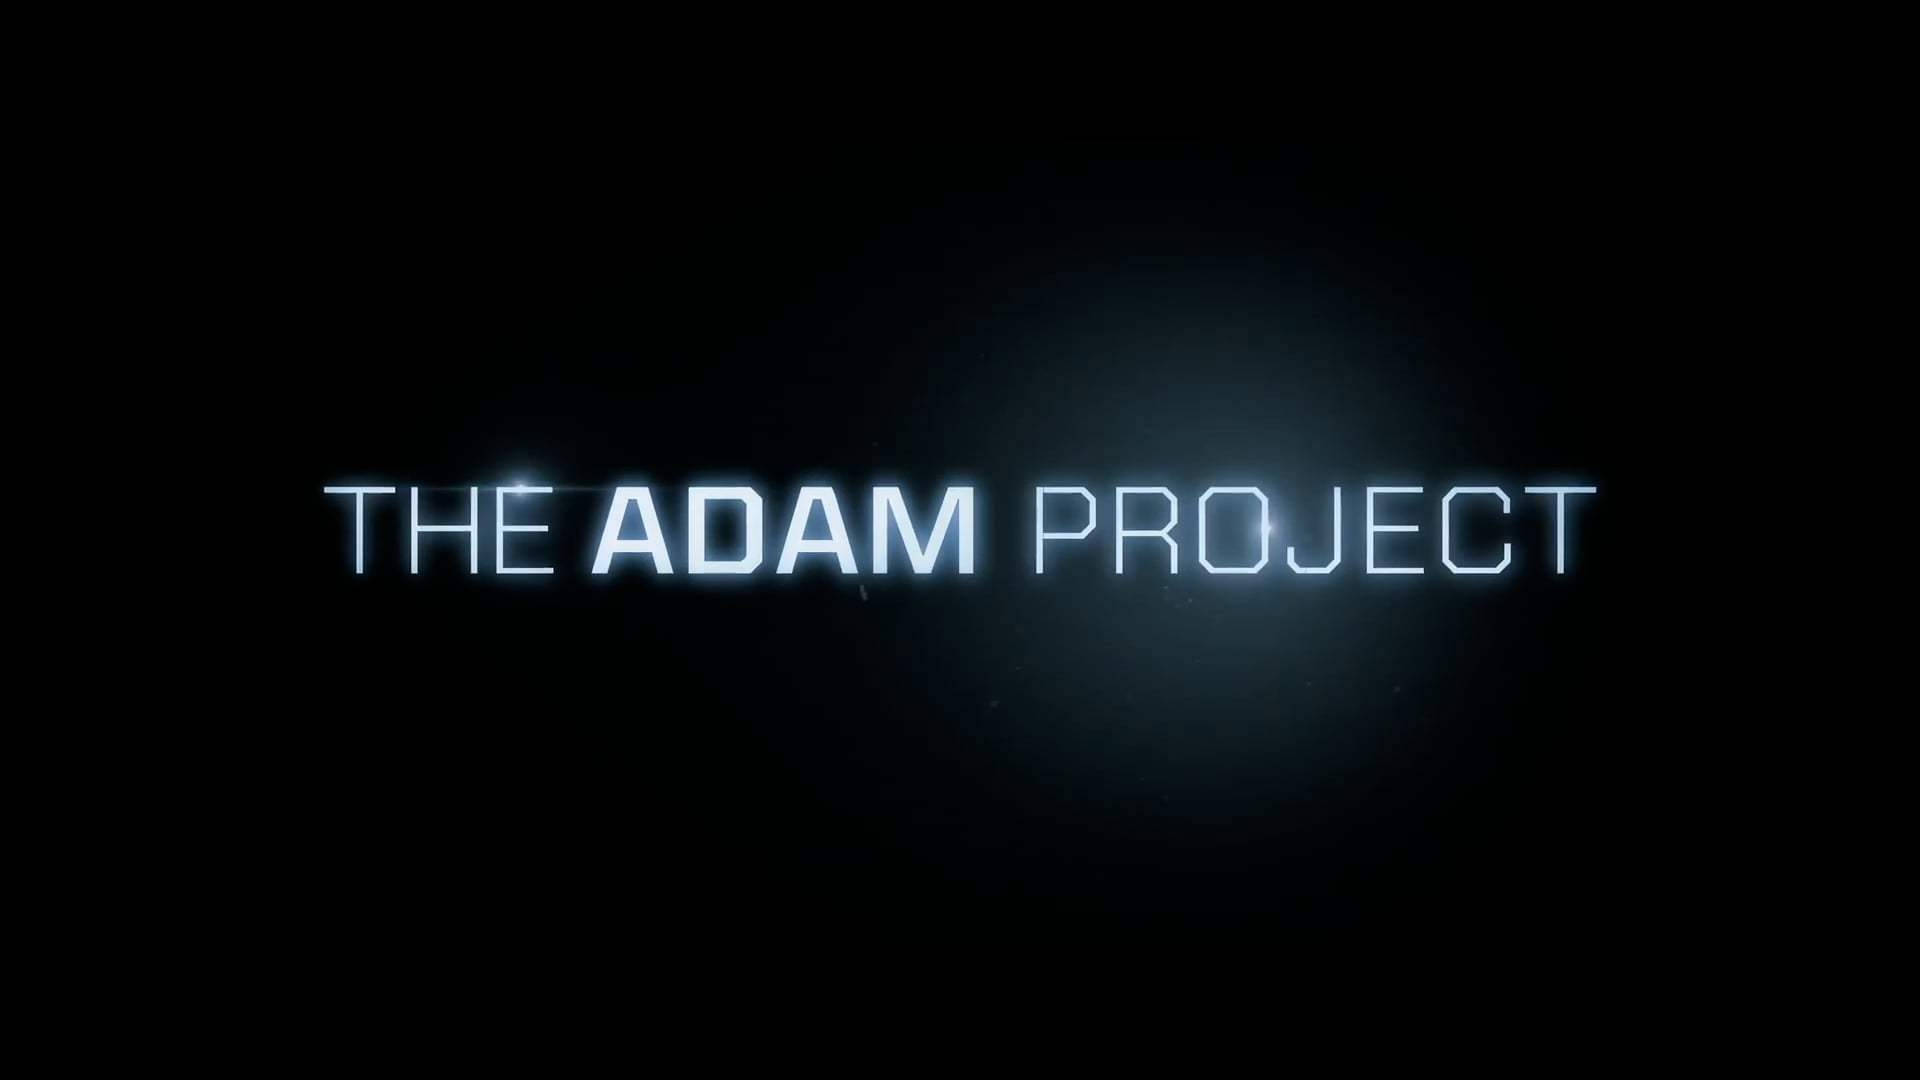 The Adam Project Title Background